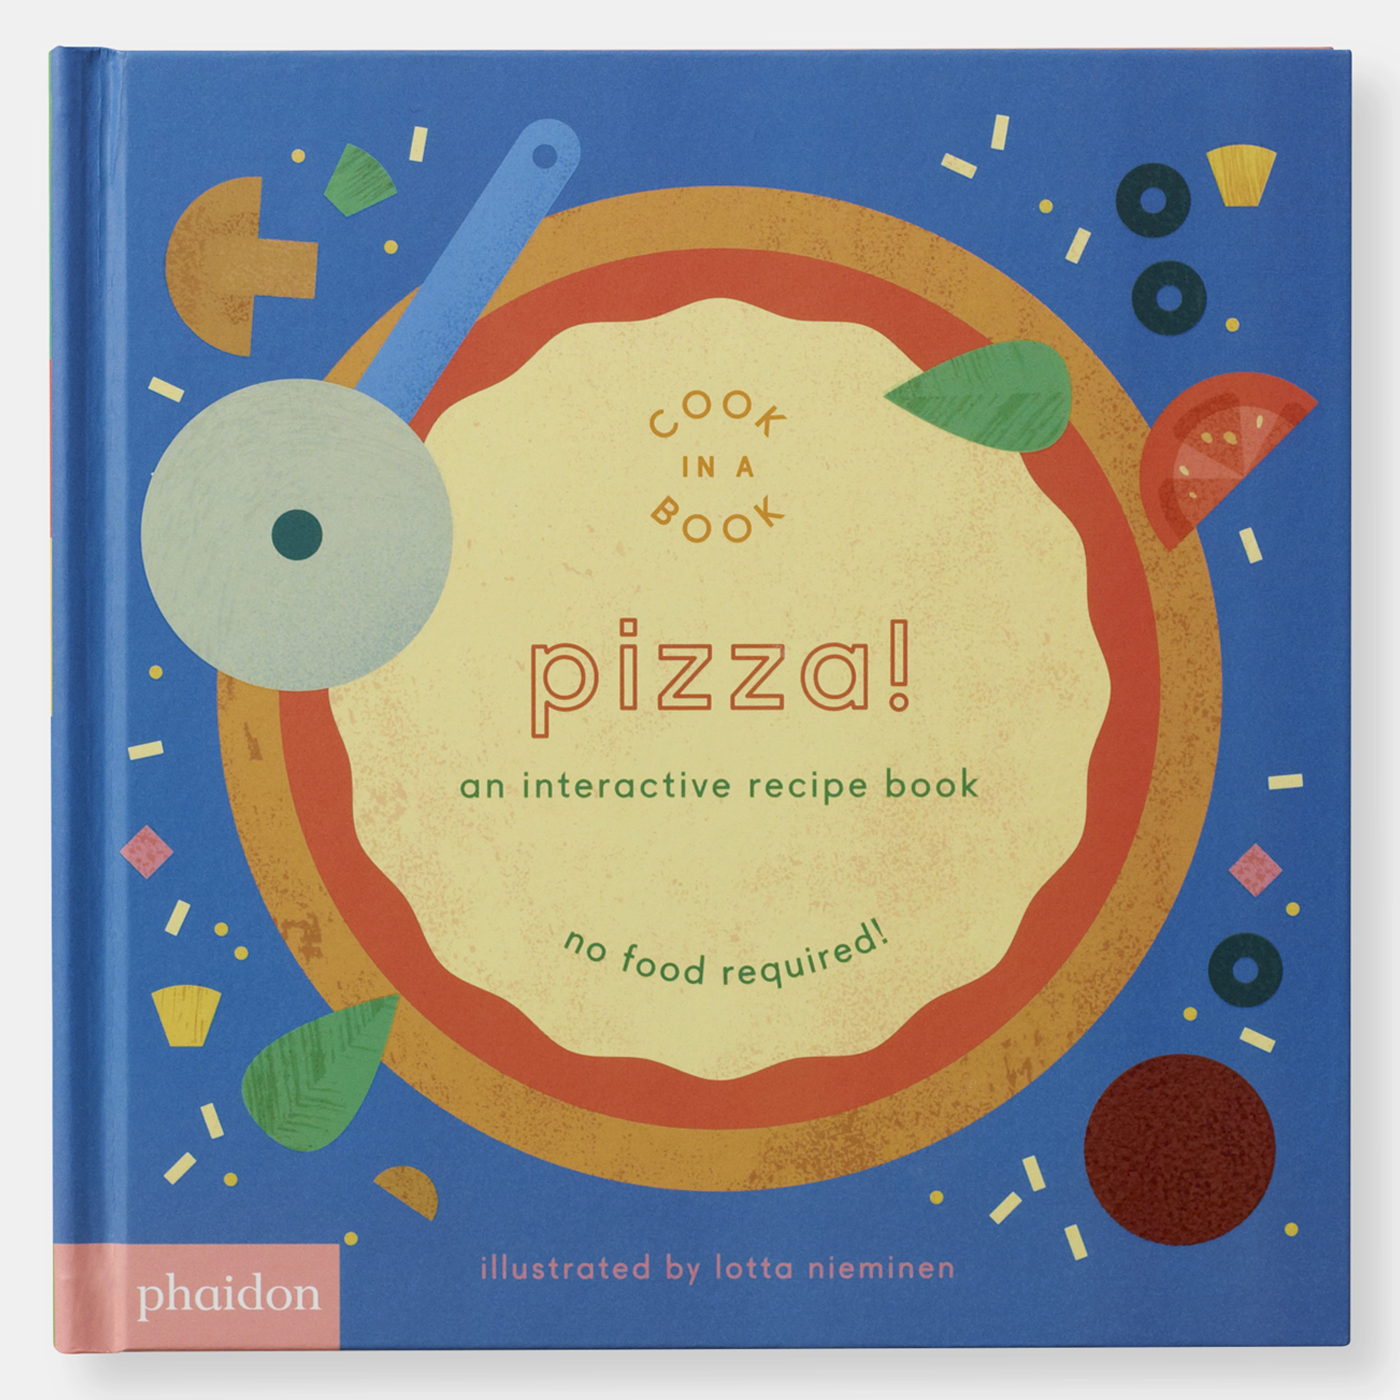 PHAIDON Cook in a Book: Pizza!